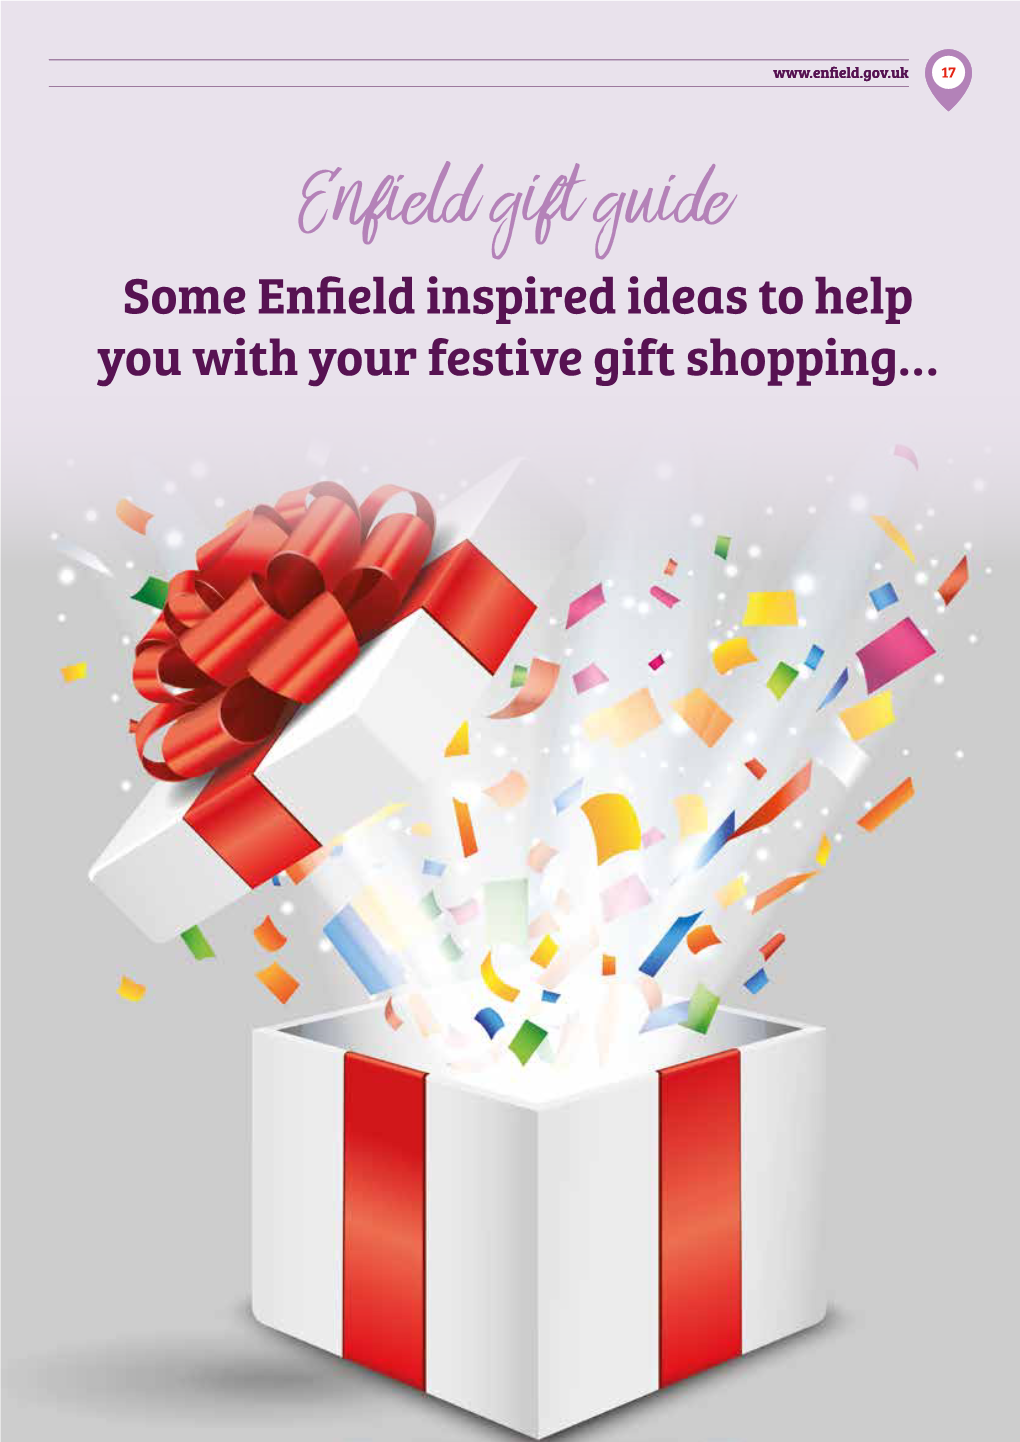 Enfield Gift Guide Some Enfield Inspired Ideas to Help You with Your Festive Gift Shopping…